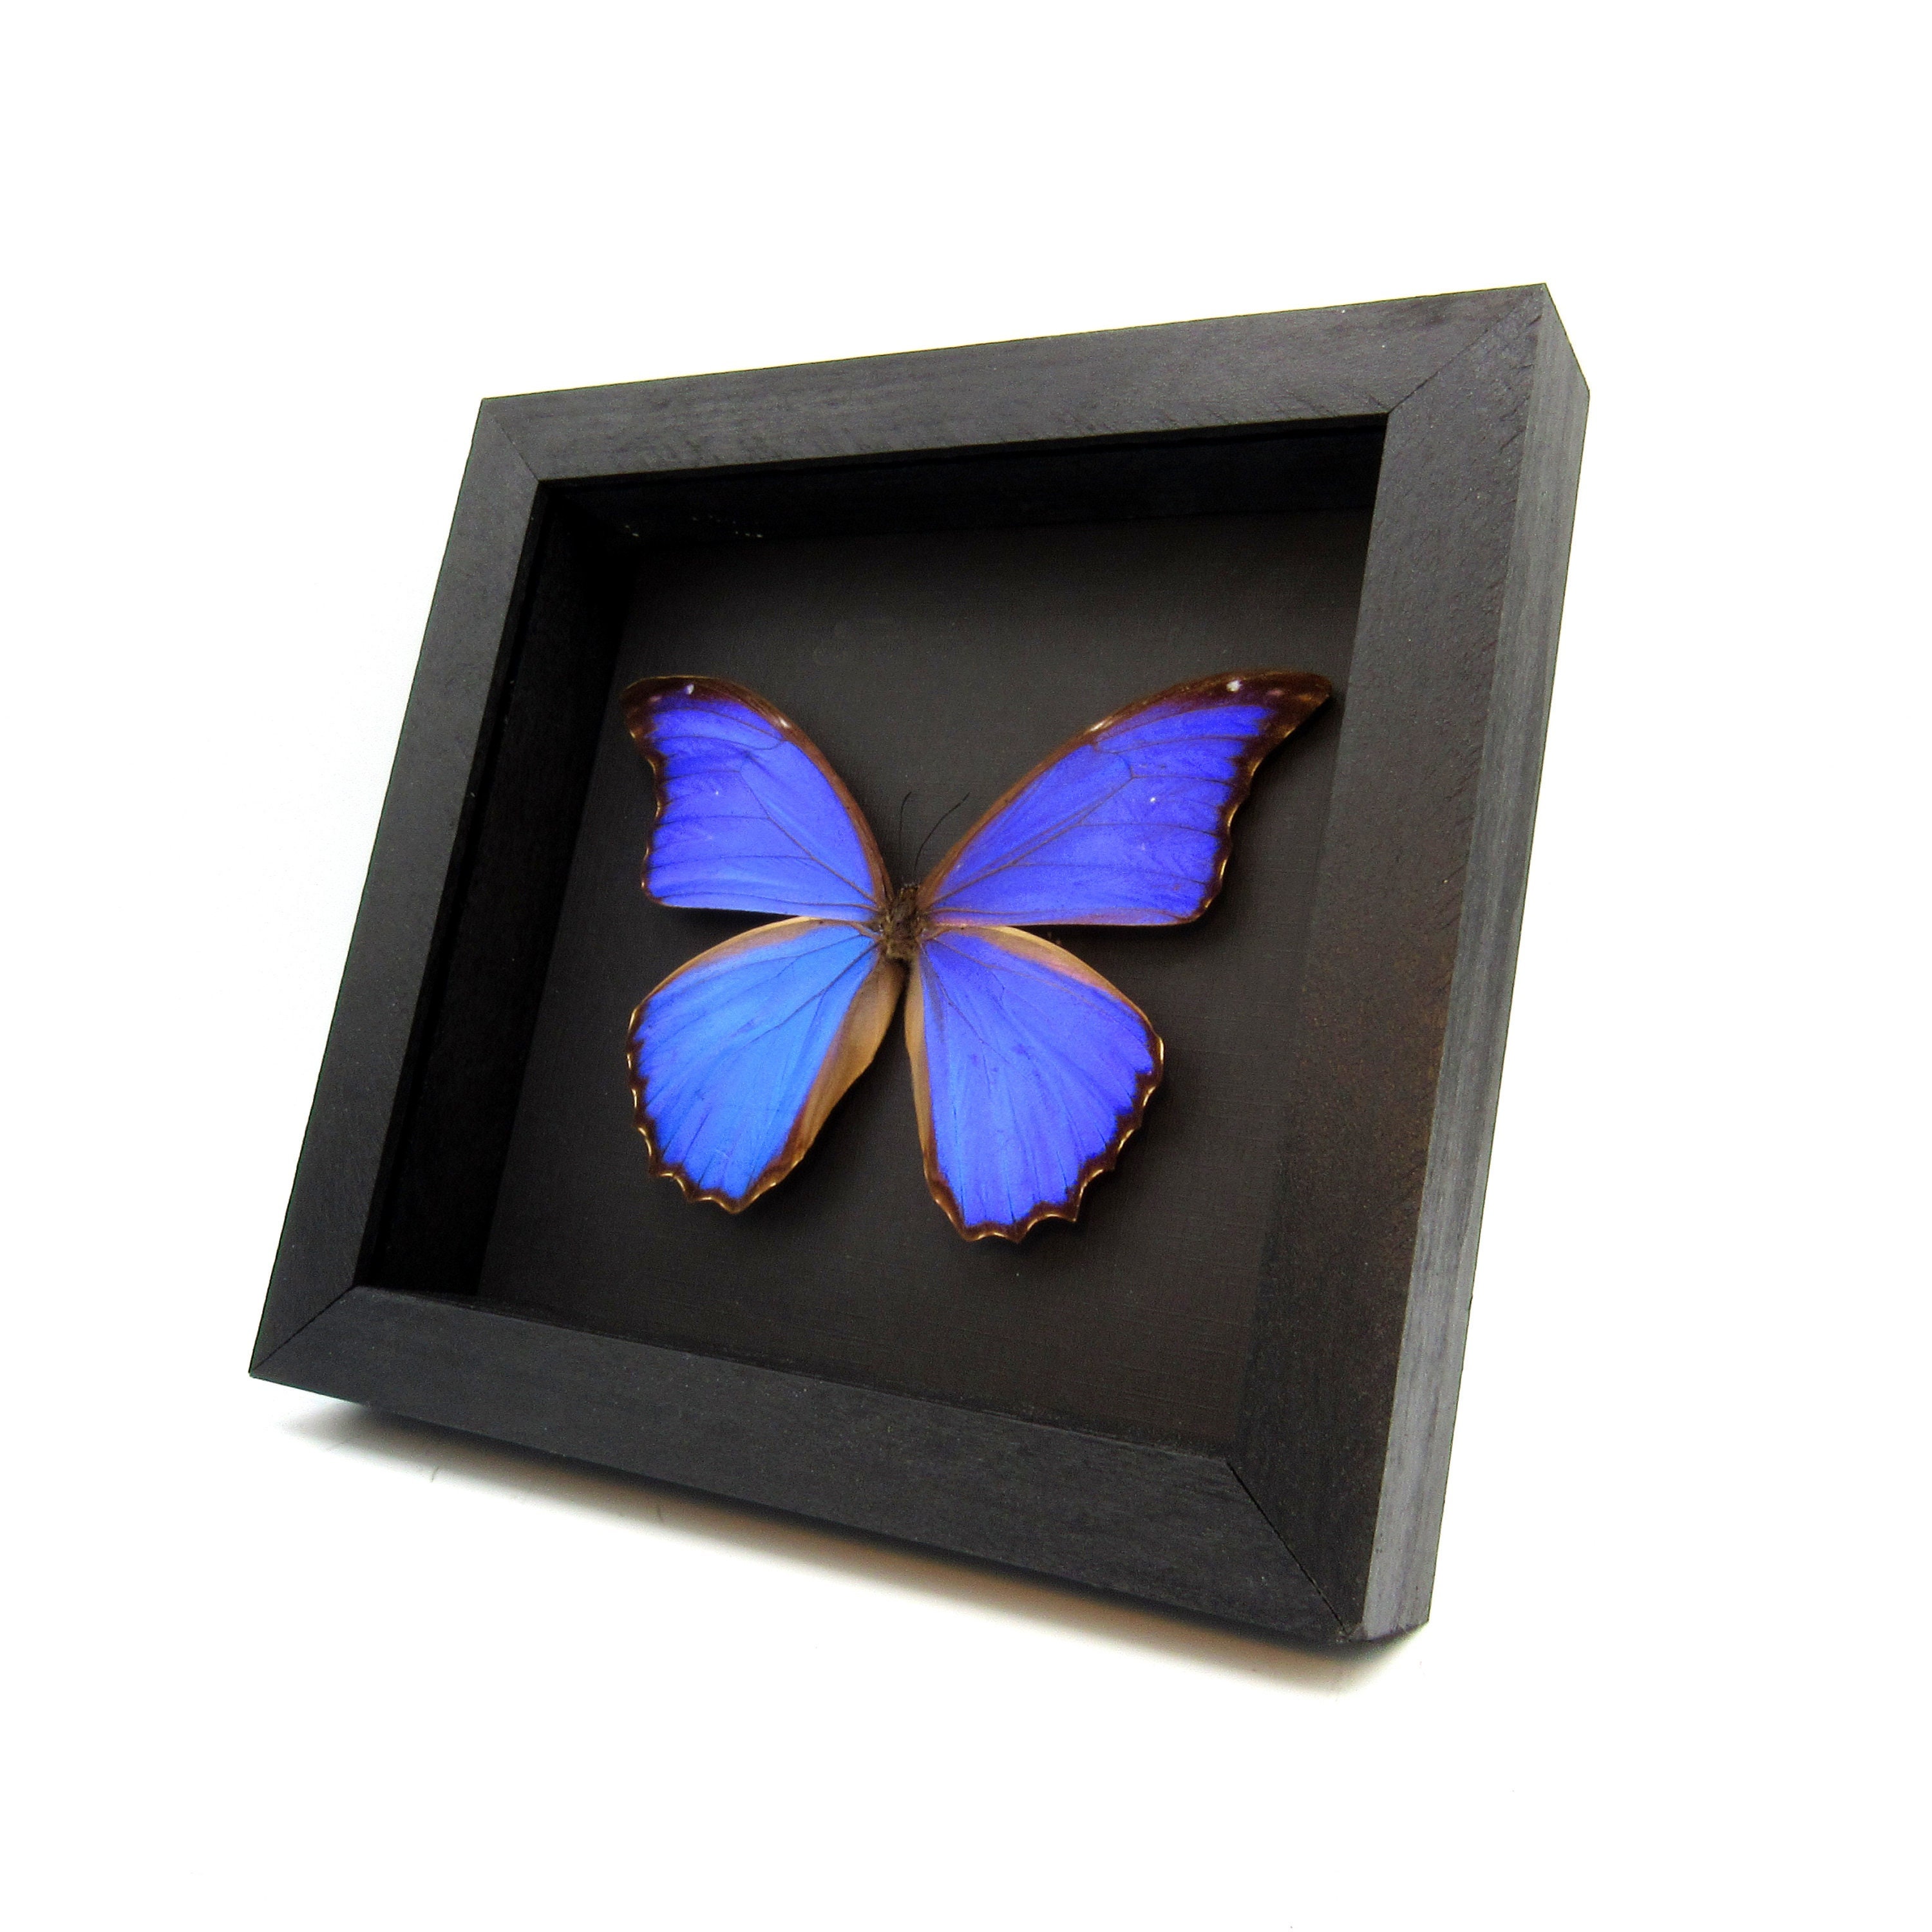 REAL FRAMED BUTTERFLY METALLIC ICE BLUE MORPHO CATENARIA CATENERIUS